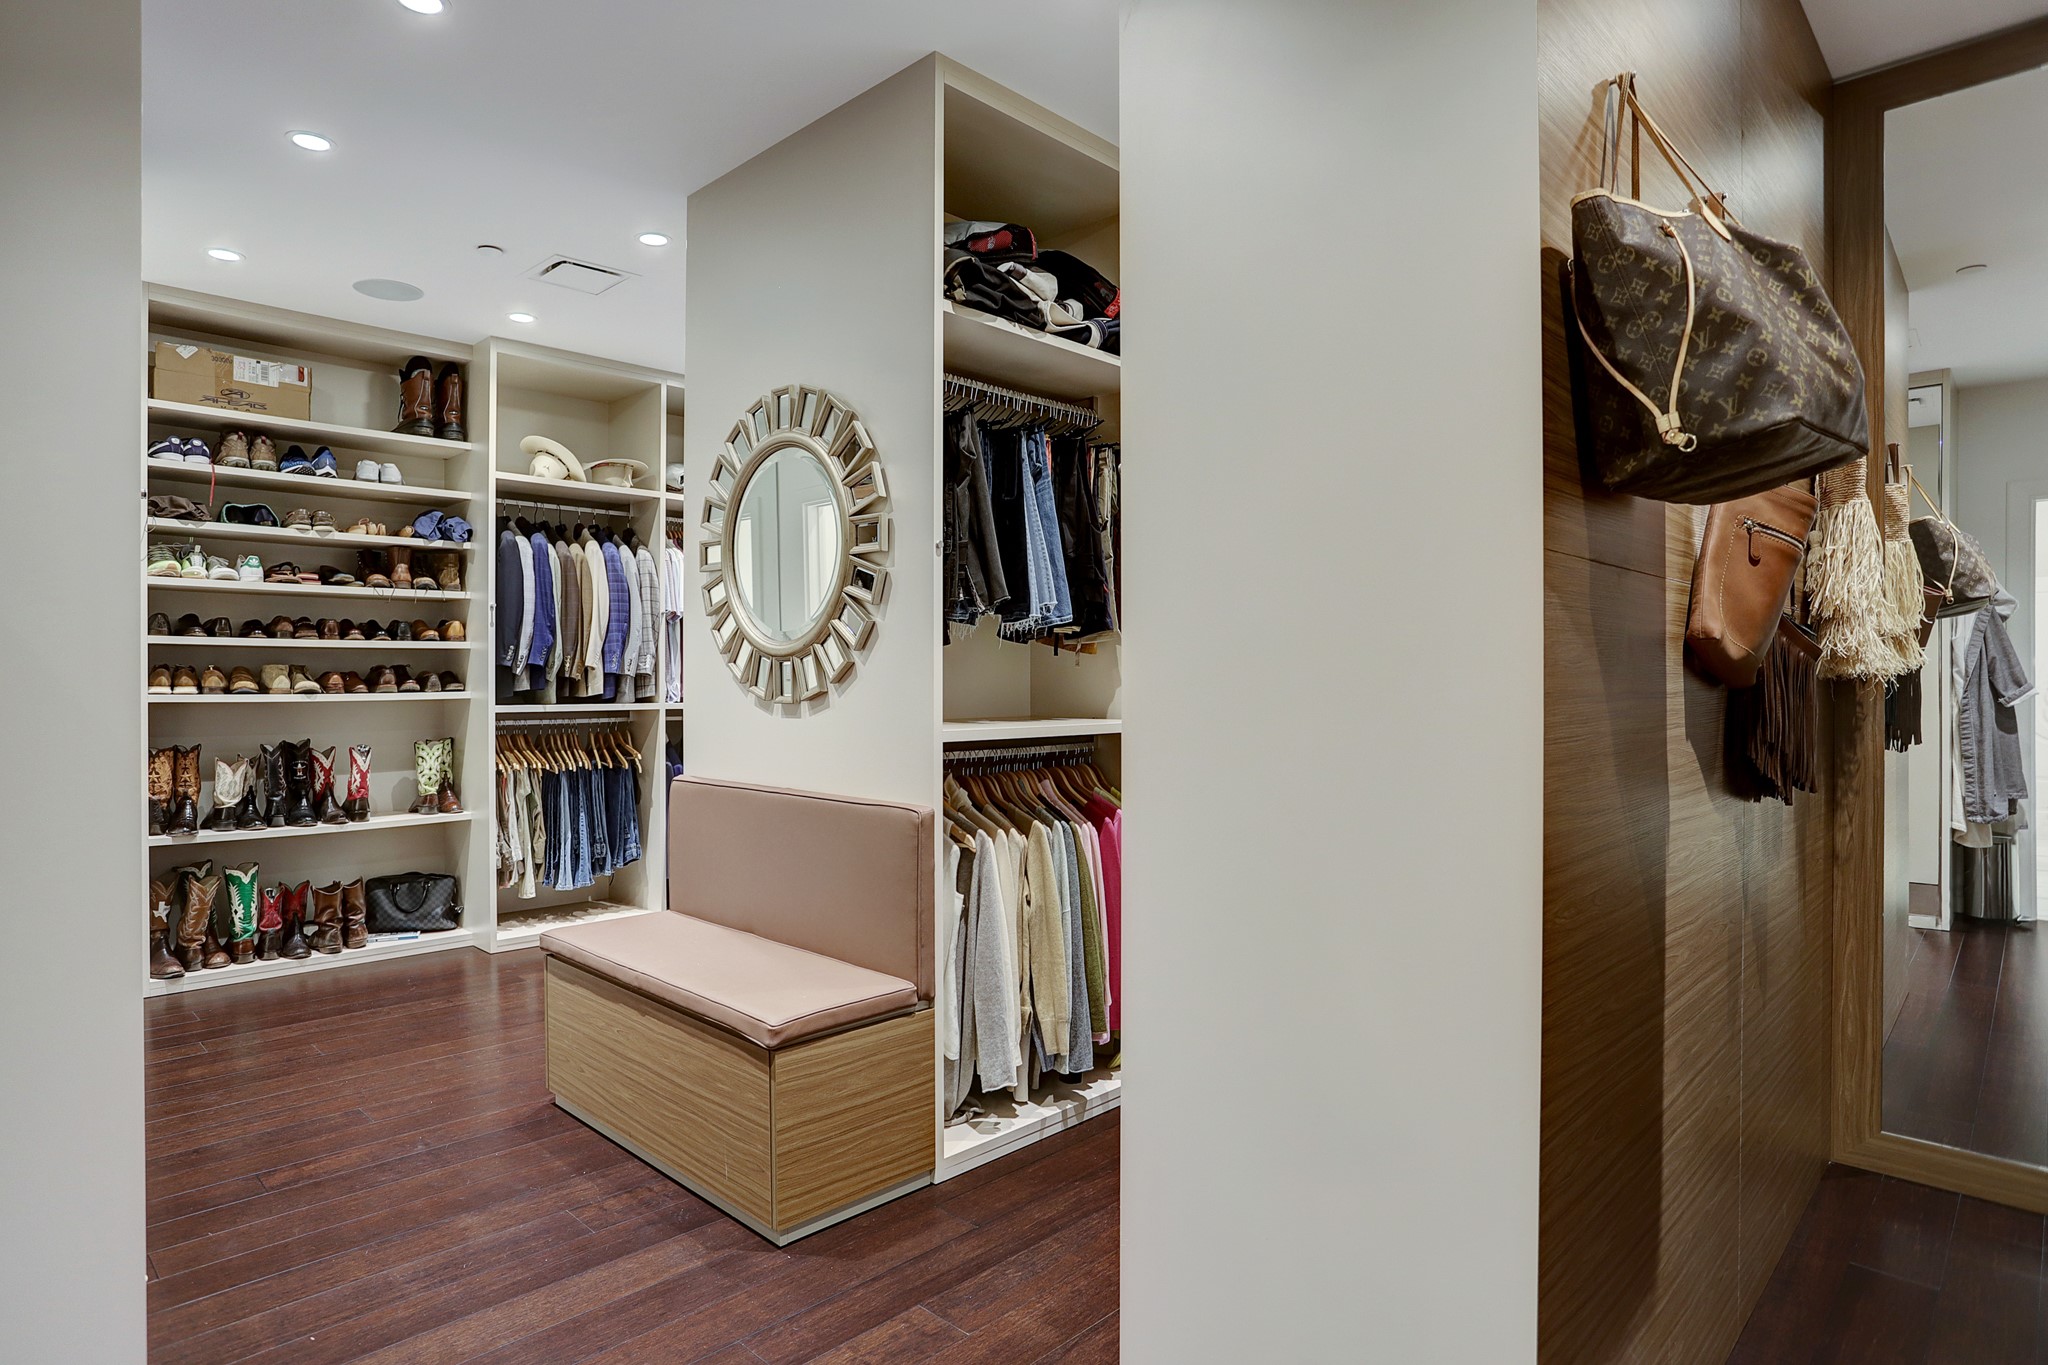 Spectacular showroom style Primary closet [20x13] features bamboo floors, leather pulls, built-in bench and ample storage for clothing of all types, shoes and accessories.